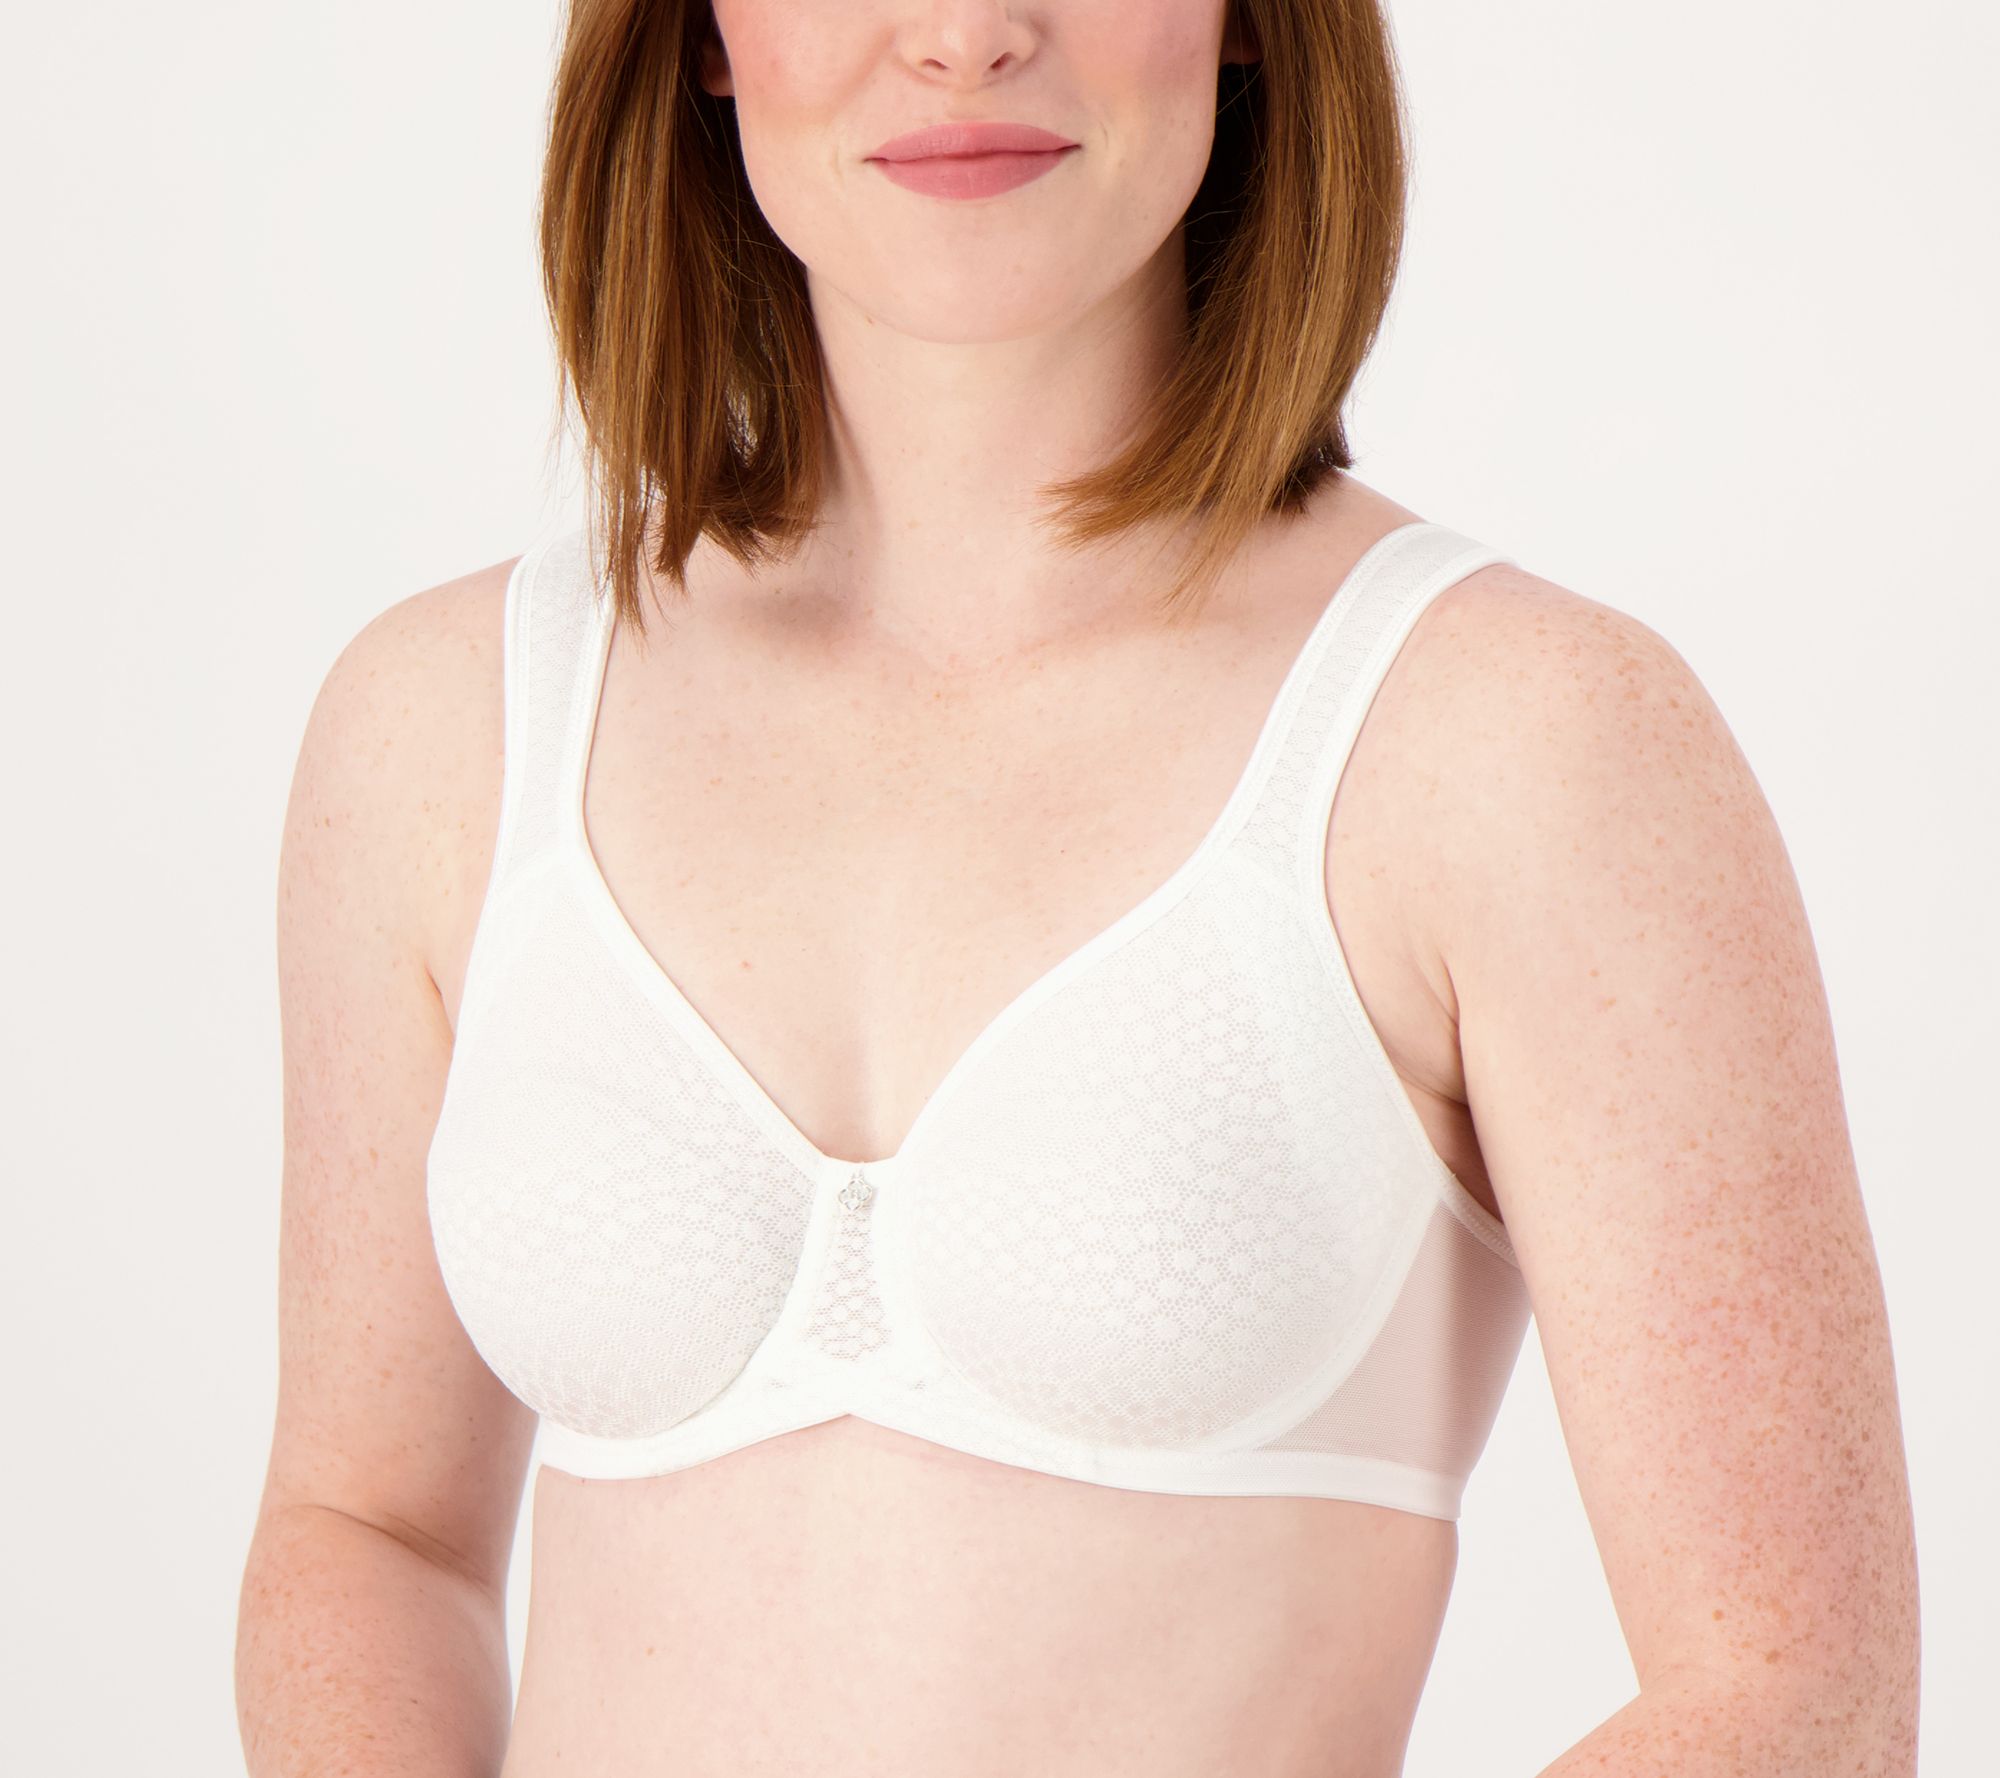 Breezies Underwire Diamond Shimmer Unlined Support Bra 